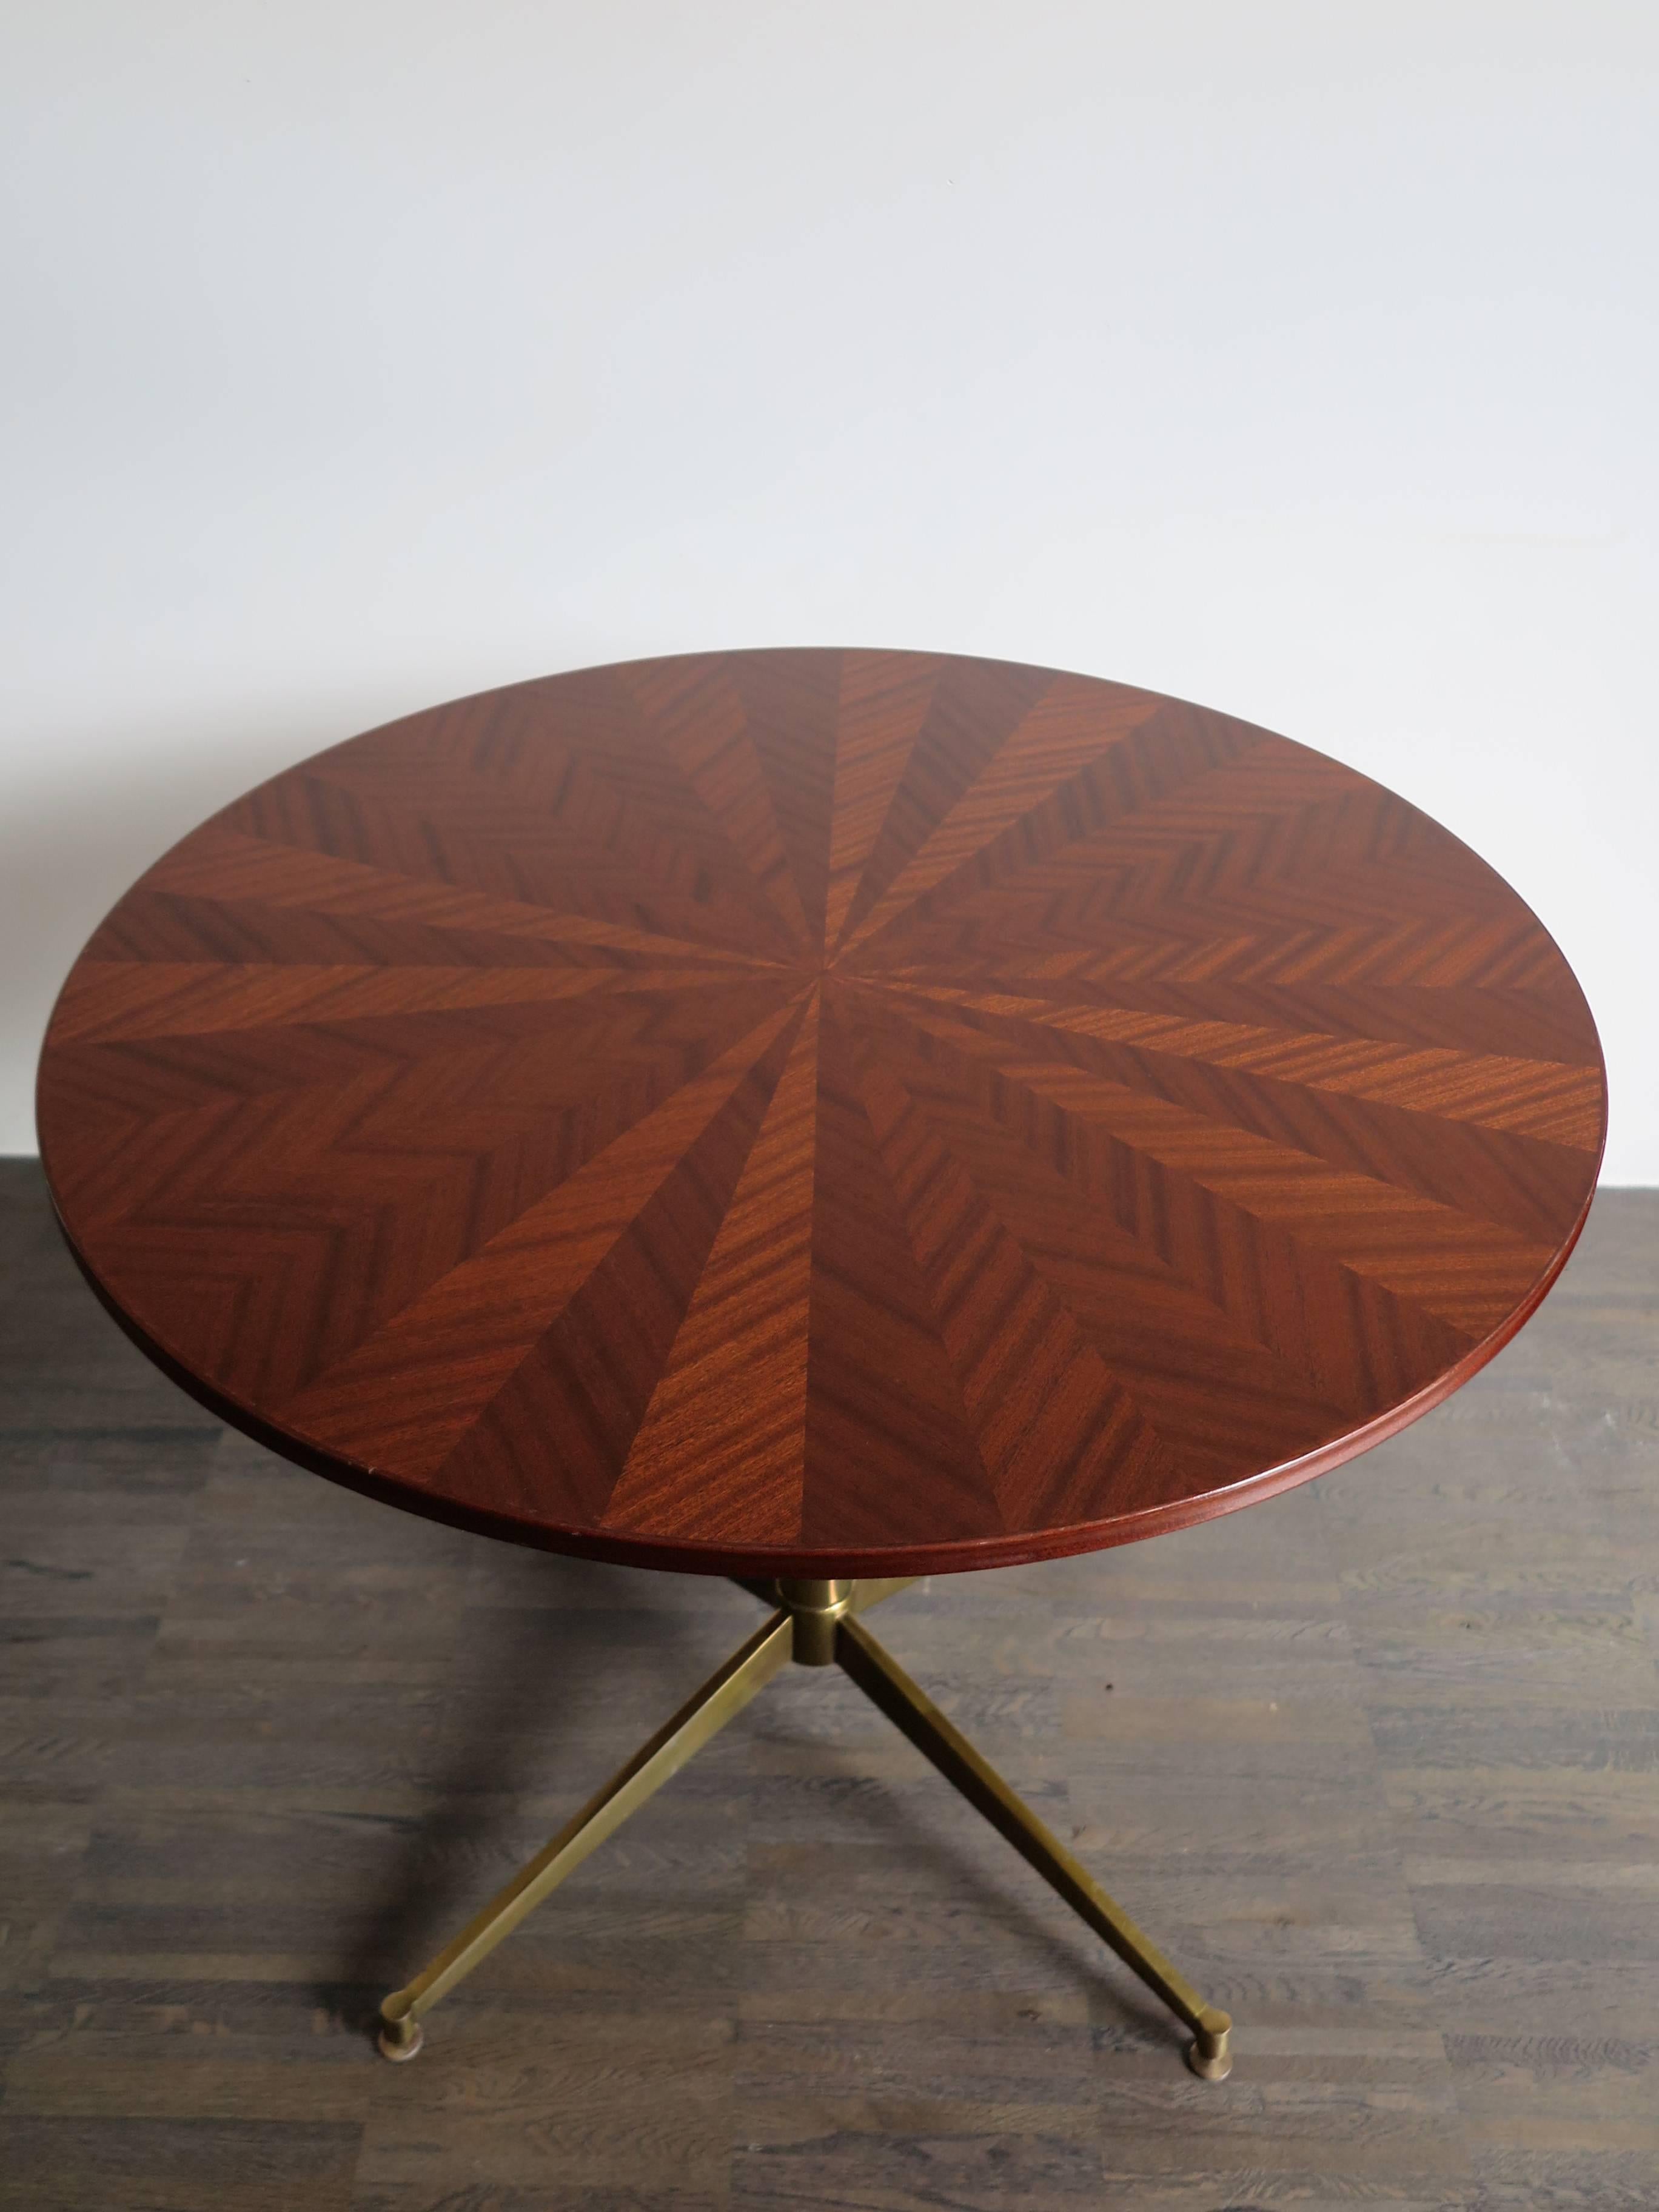 Very famous, rare and amazing Italian Ignazio Gardella table or coffee and cocktail table produced by Azucena with top in dark veneered wood inlay and glossy varnish, amazing brass structure with variable height (from minimum of 55 cm up to a